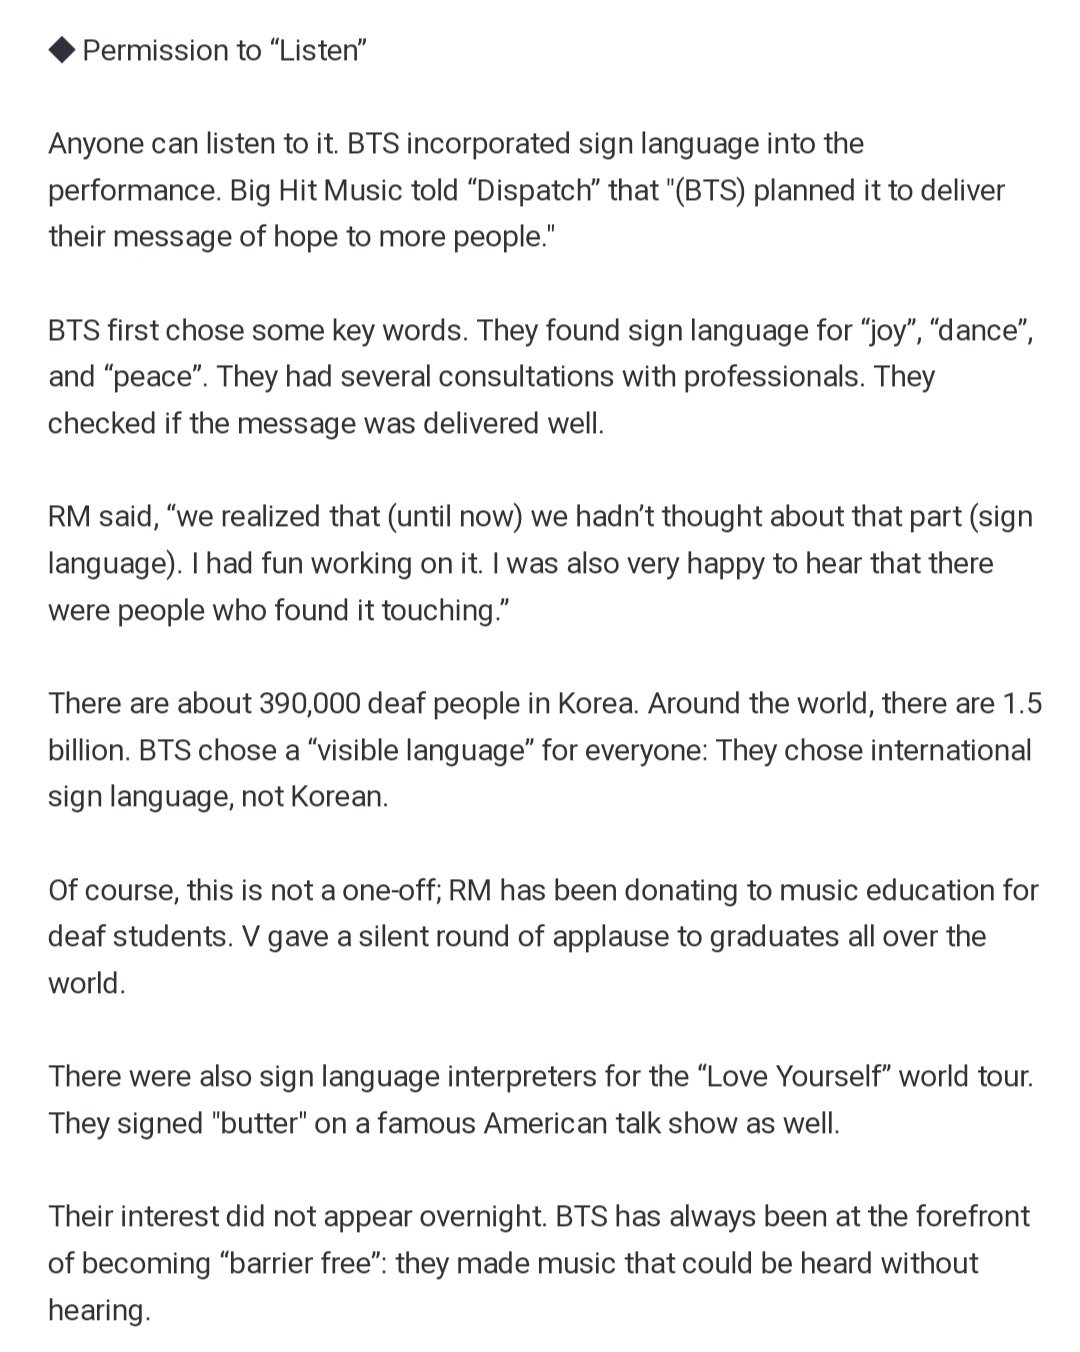 fresh shepherd Play sports BTS Press⁷ on Twitter: "Big Hit Music said, “BTS planned it to deliver  their message of hope to more people.” RM said, “we realized that (until  now) we hadn't thought about that